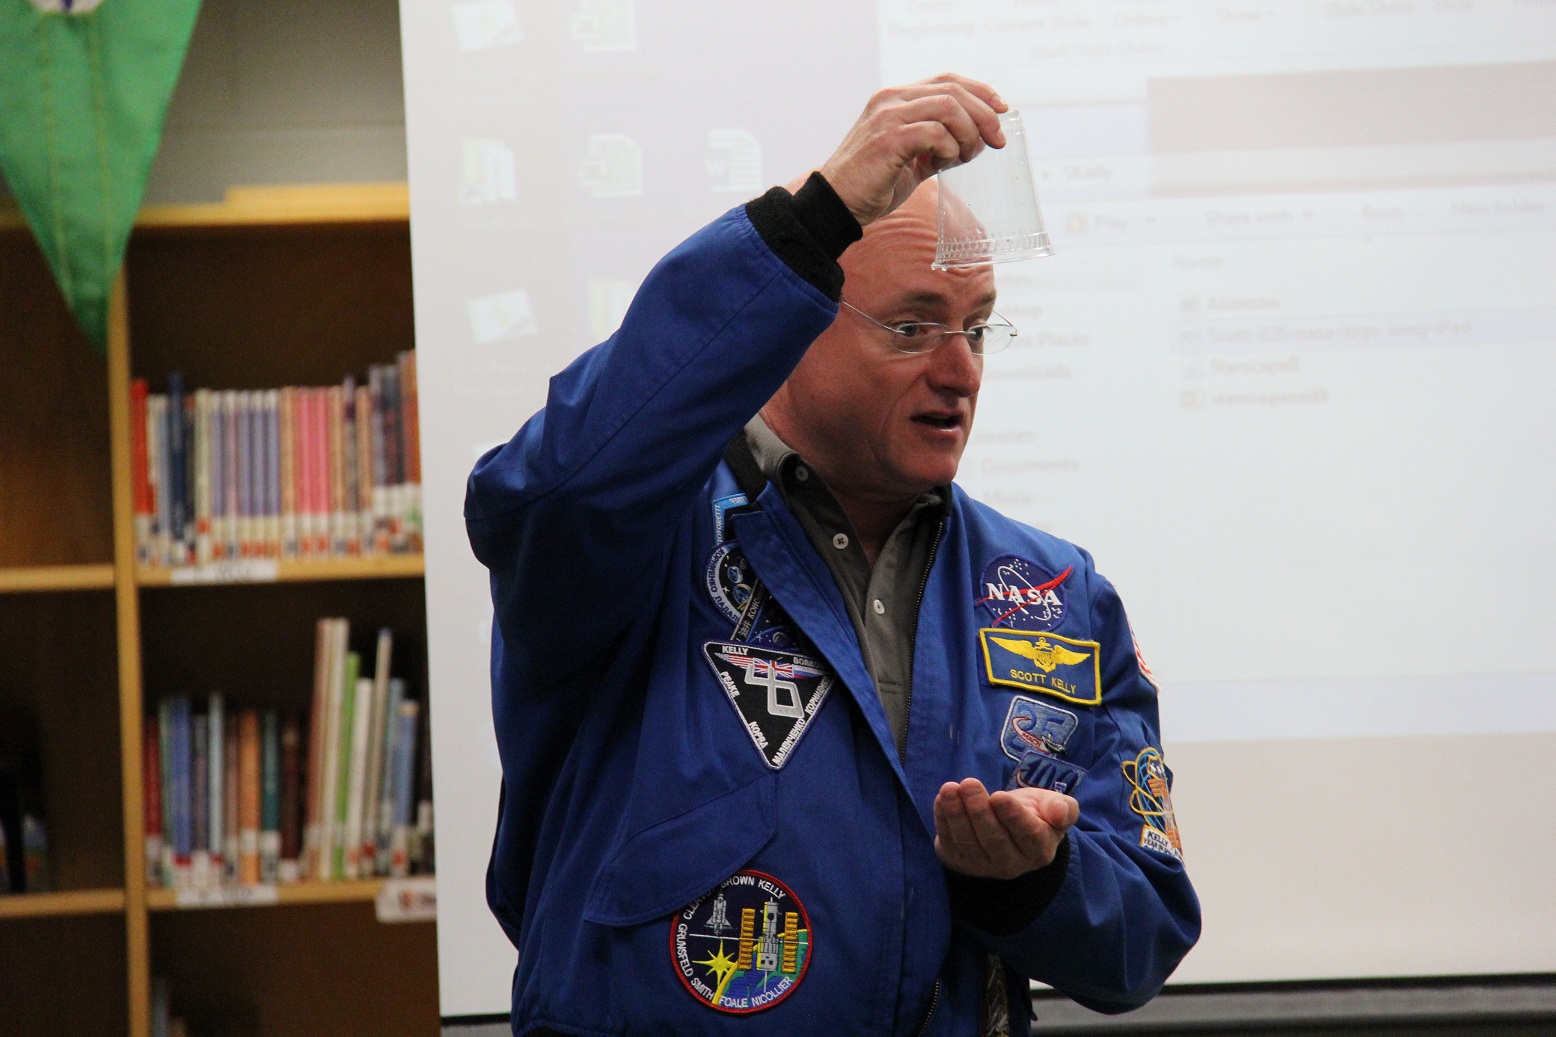 NASA astronaut Scott Kelly demonstrated the effect of gravity on water.